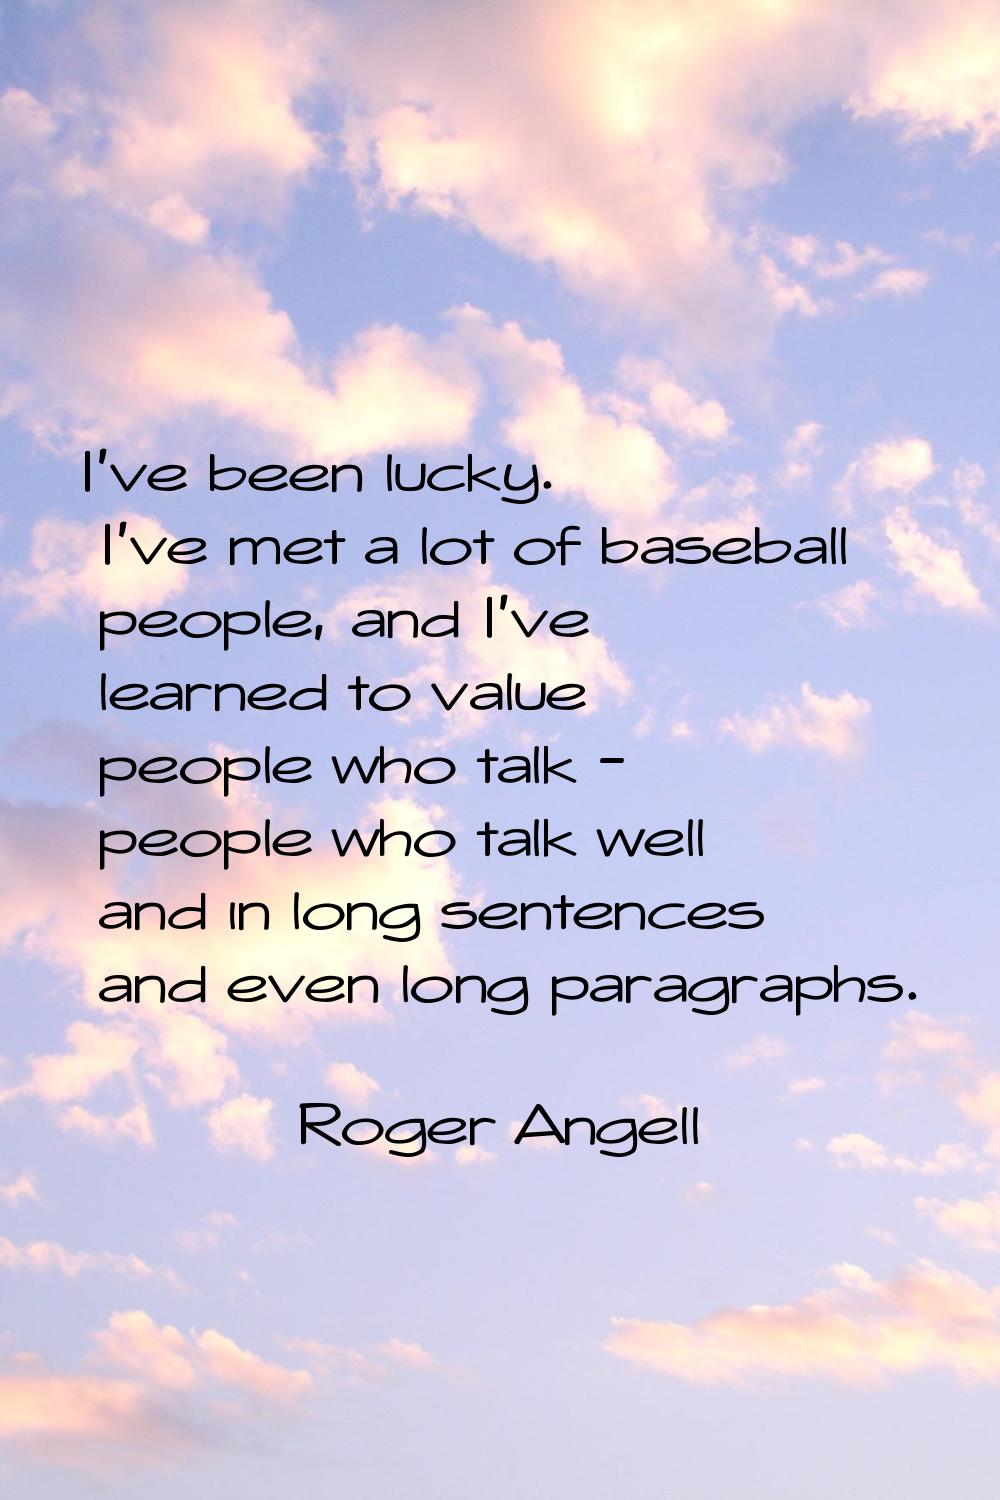 I've been lucky. I've met a lot of baseball people, and I've learned to value people who talk - peo